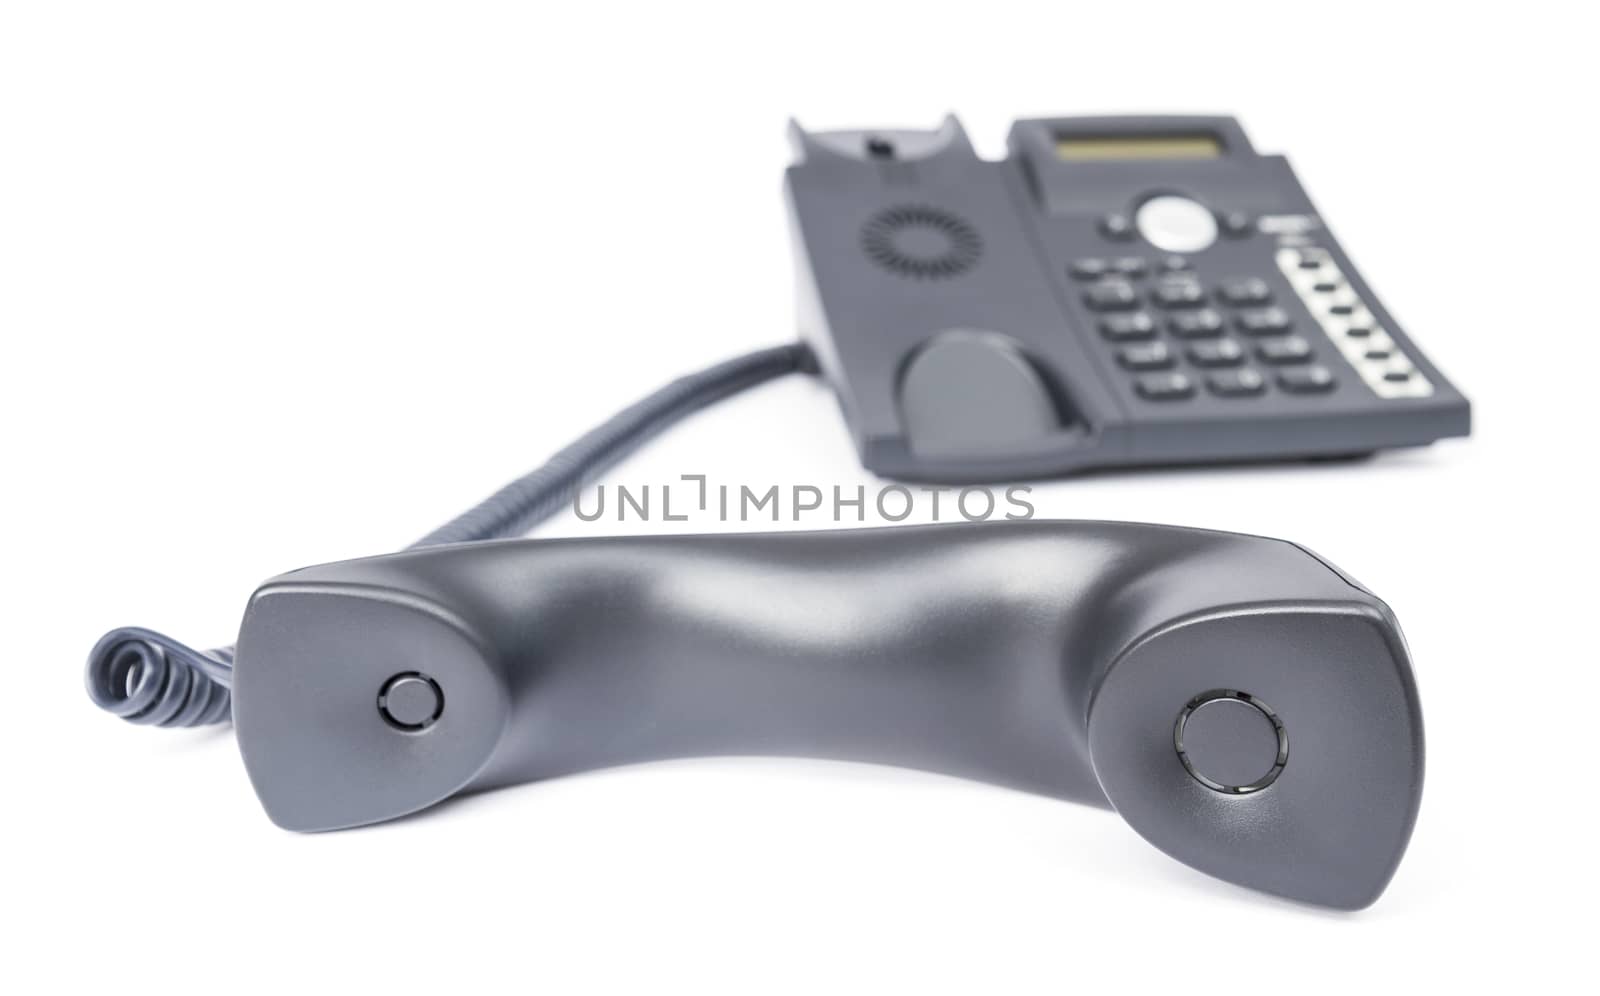 simple business phone on white background by gewoldi